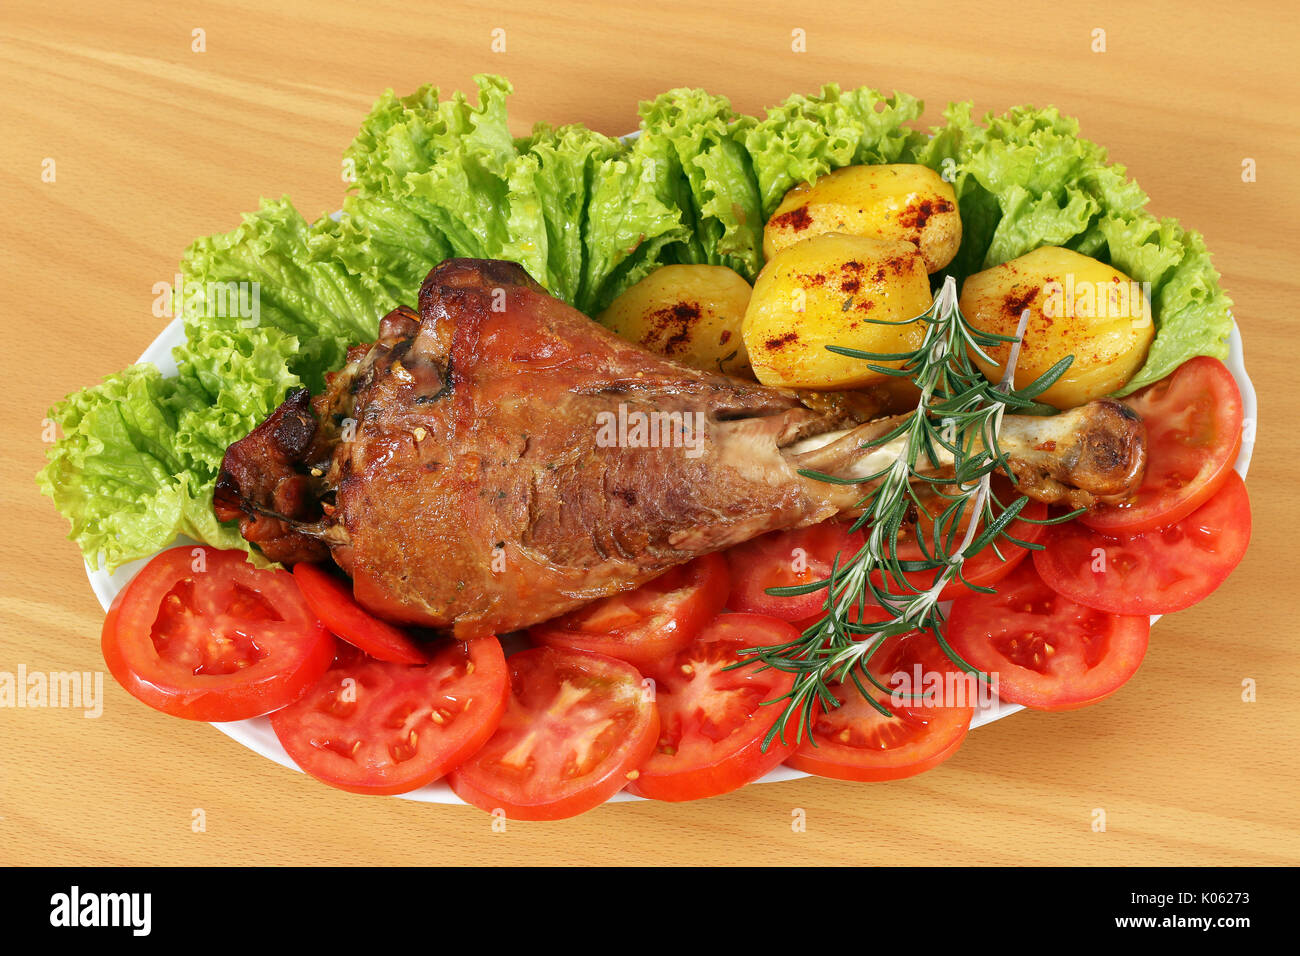 turkey drumstick with potatoes and salad Stock Photo